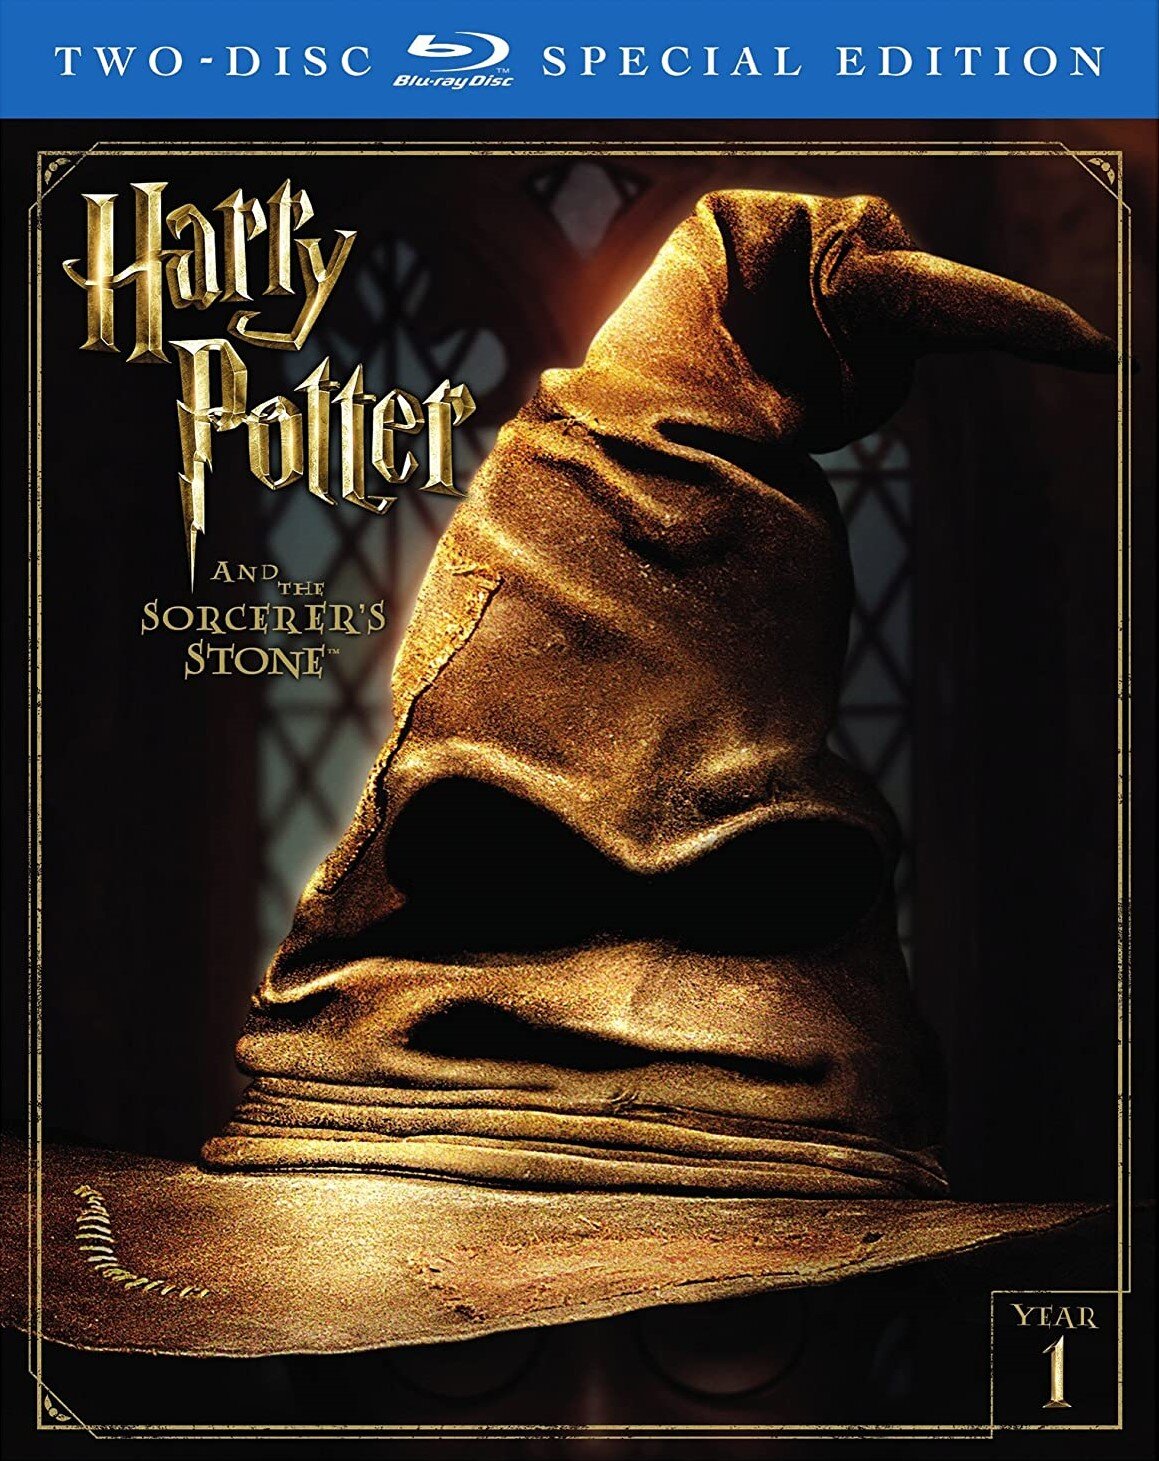 Harry Potter and Sorcerer's Stone 2 Disc Special Edition.jpg